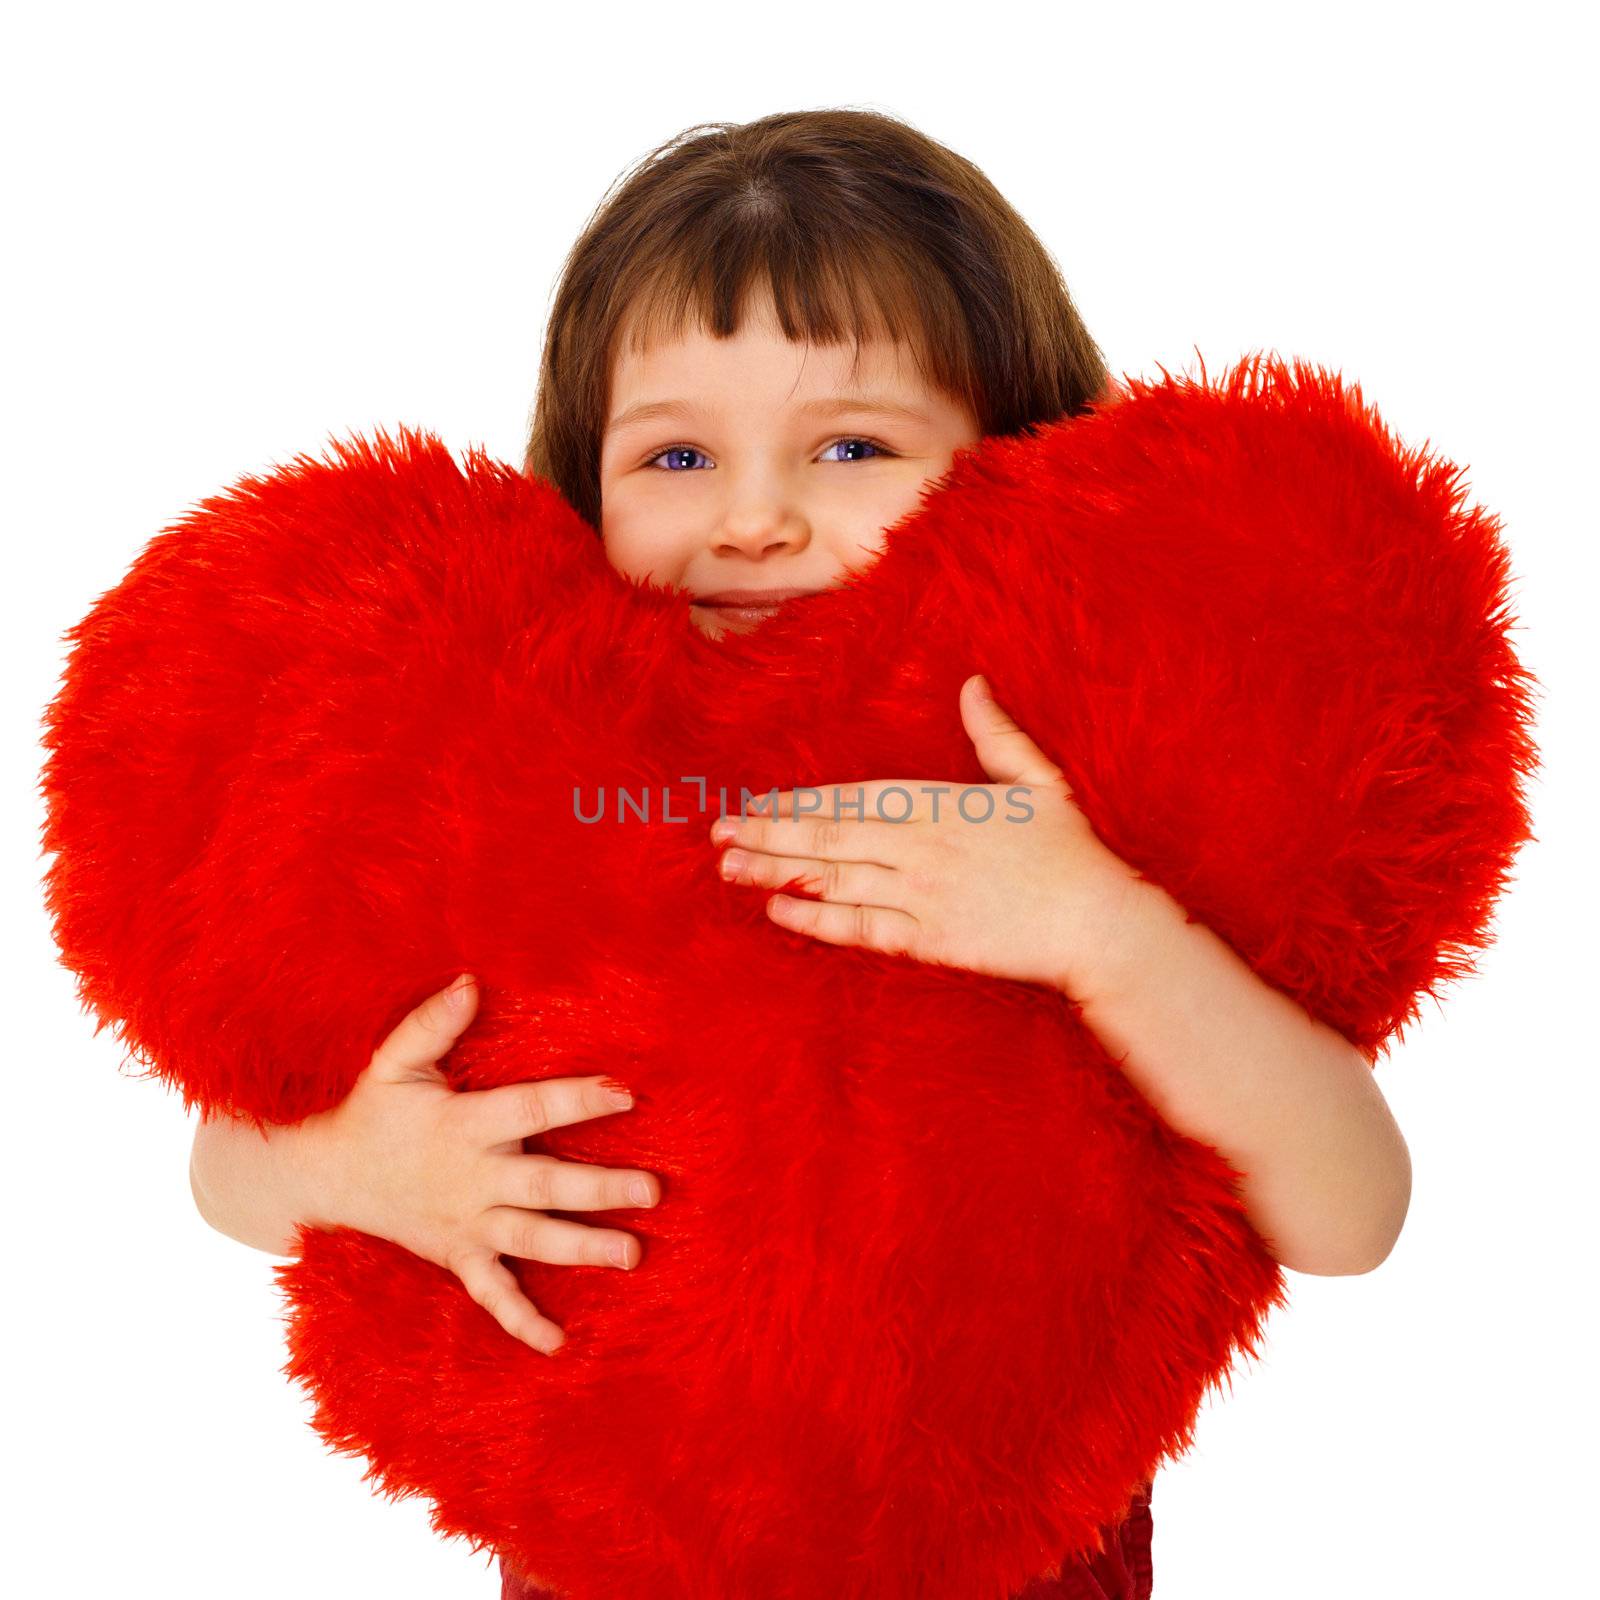 Little girl hugging a large toy heart isolated on white background